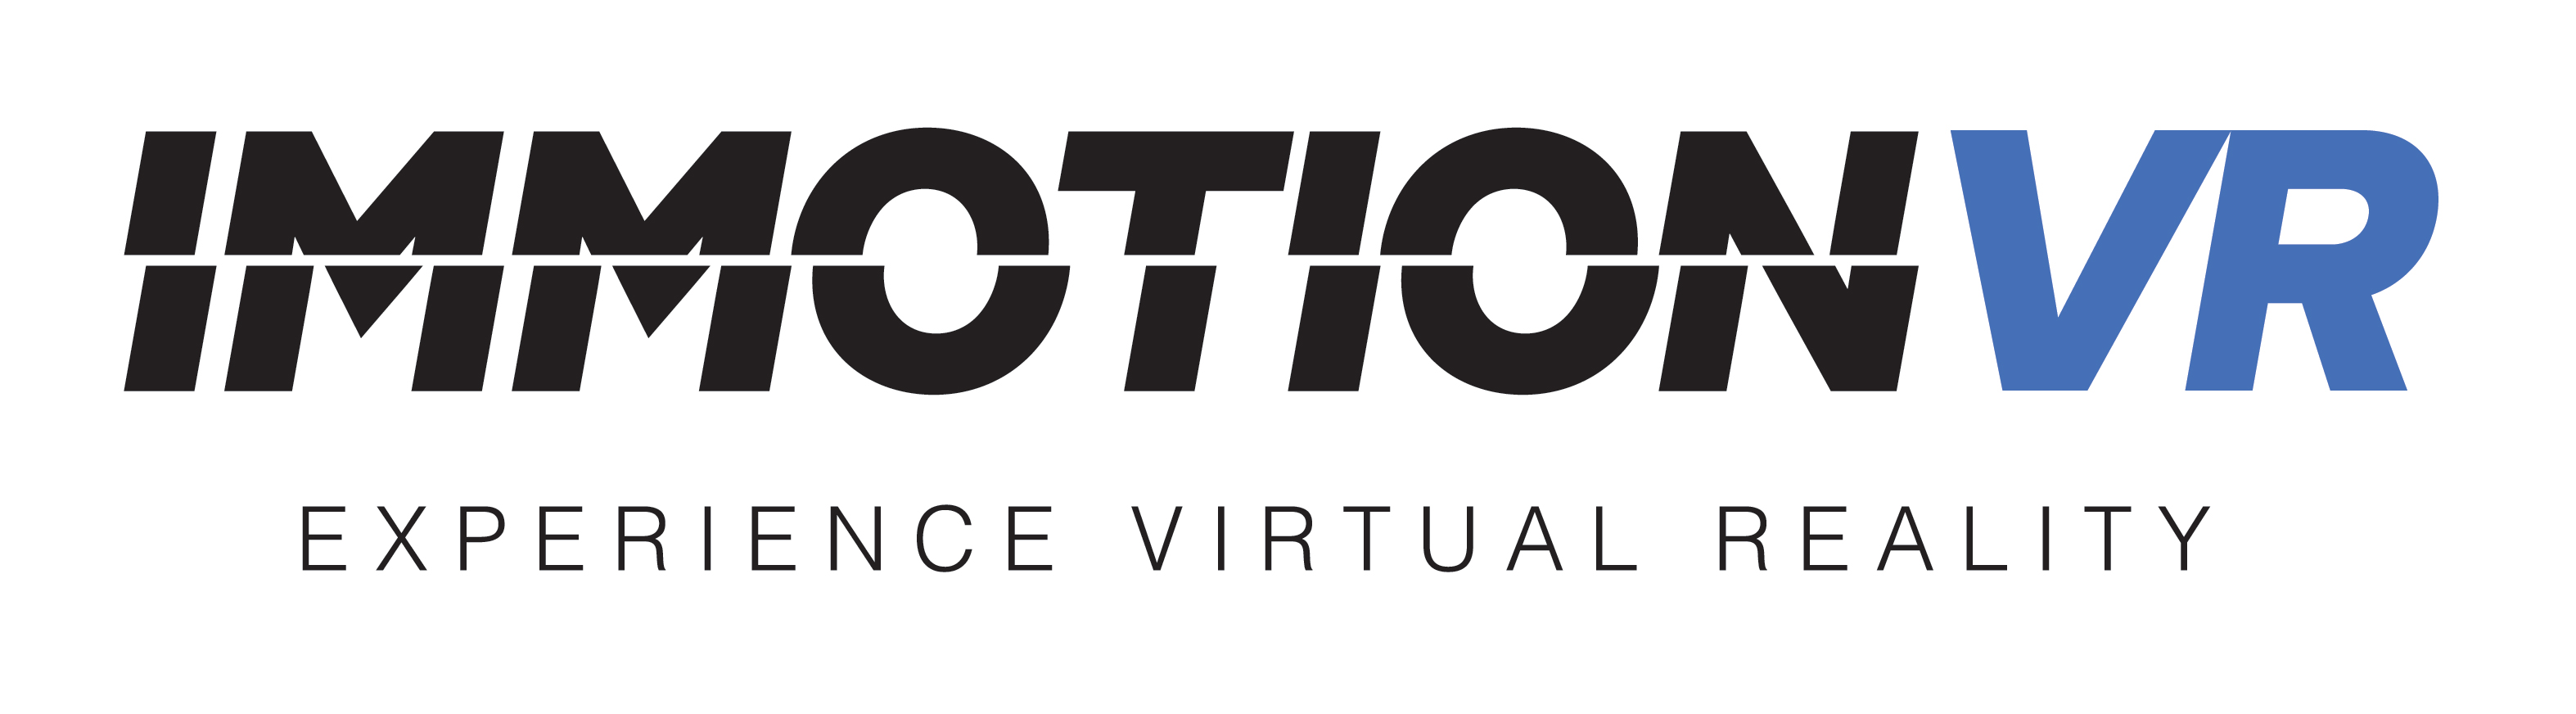 Exclusive discount at Inmotion VR for Esports Wales members!